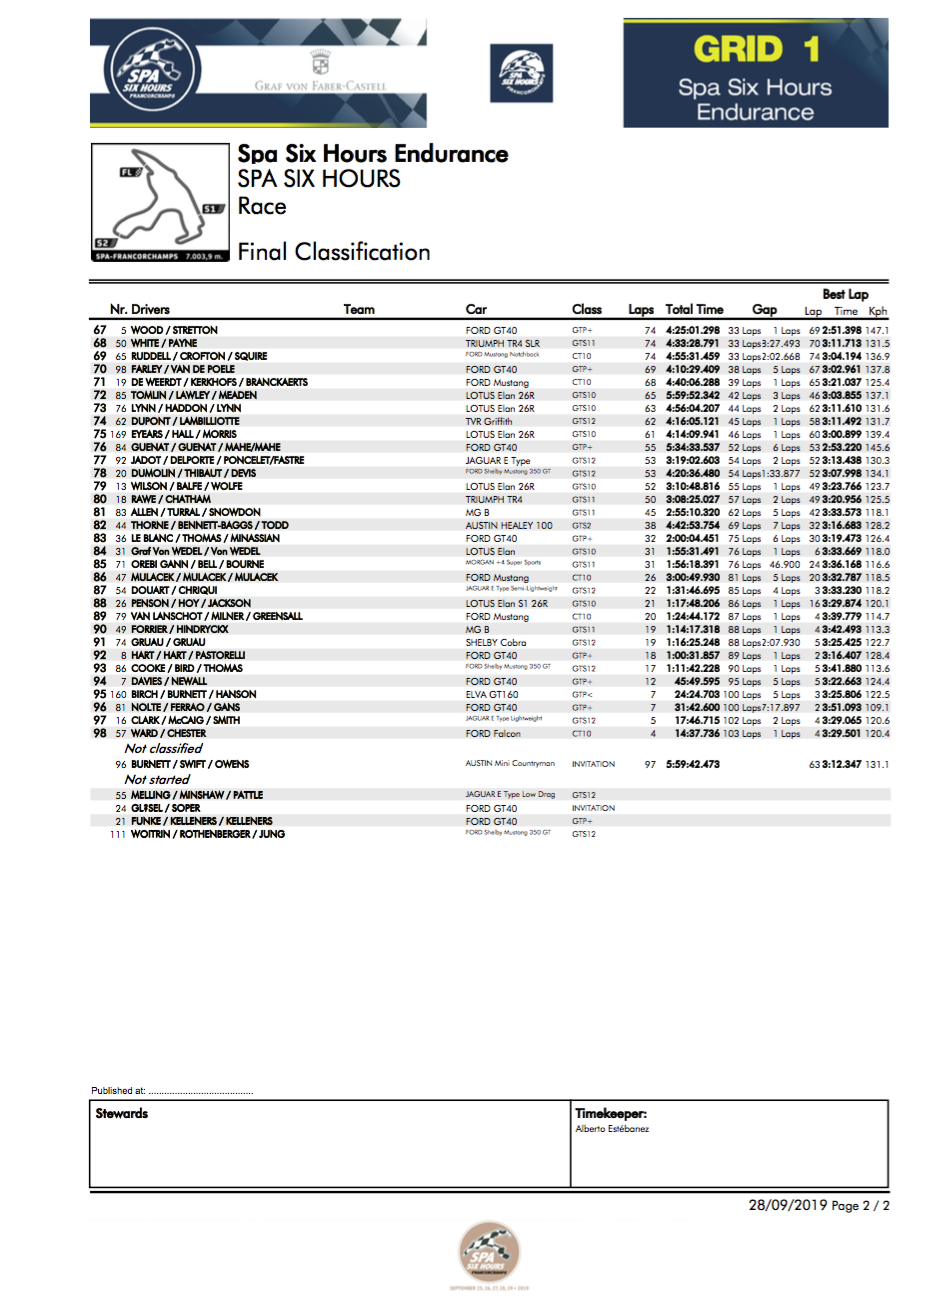 Spa Six Hours Result 2